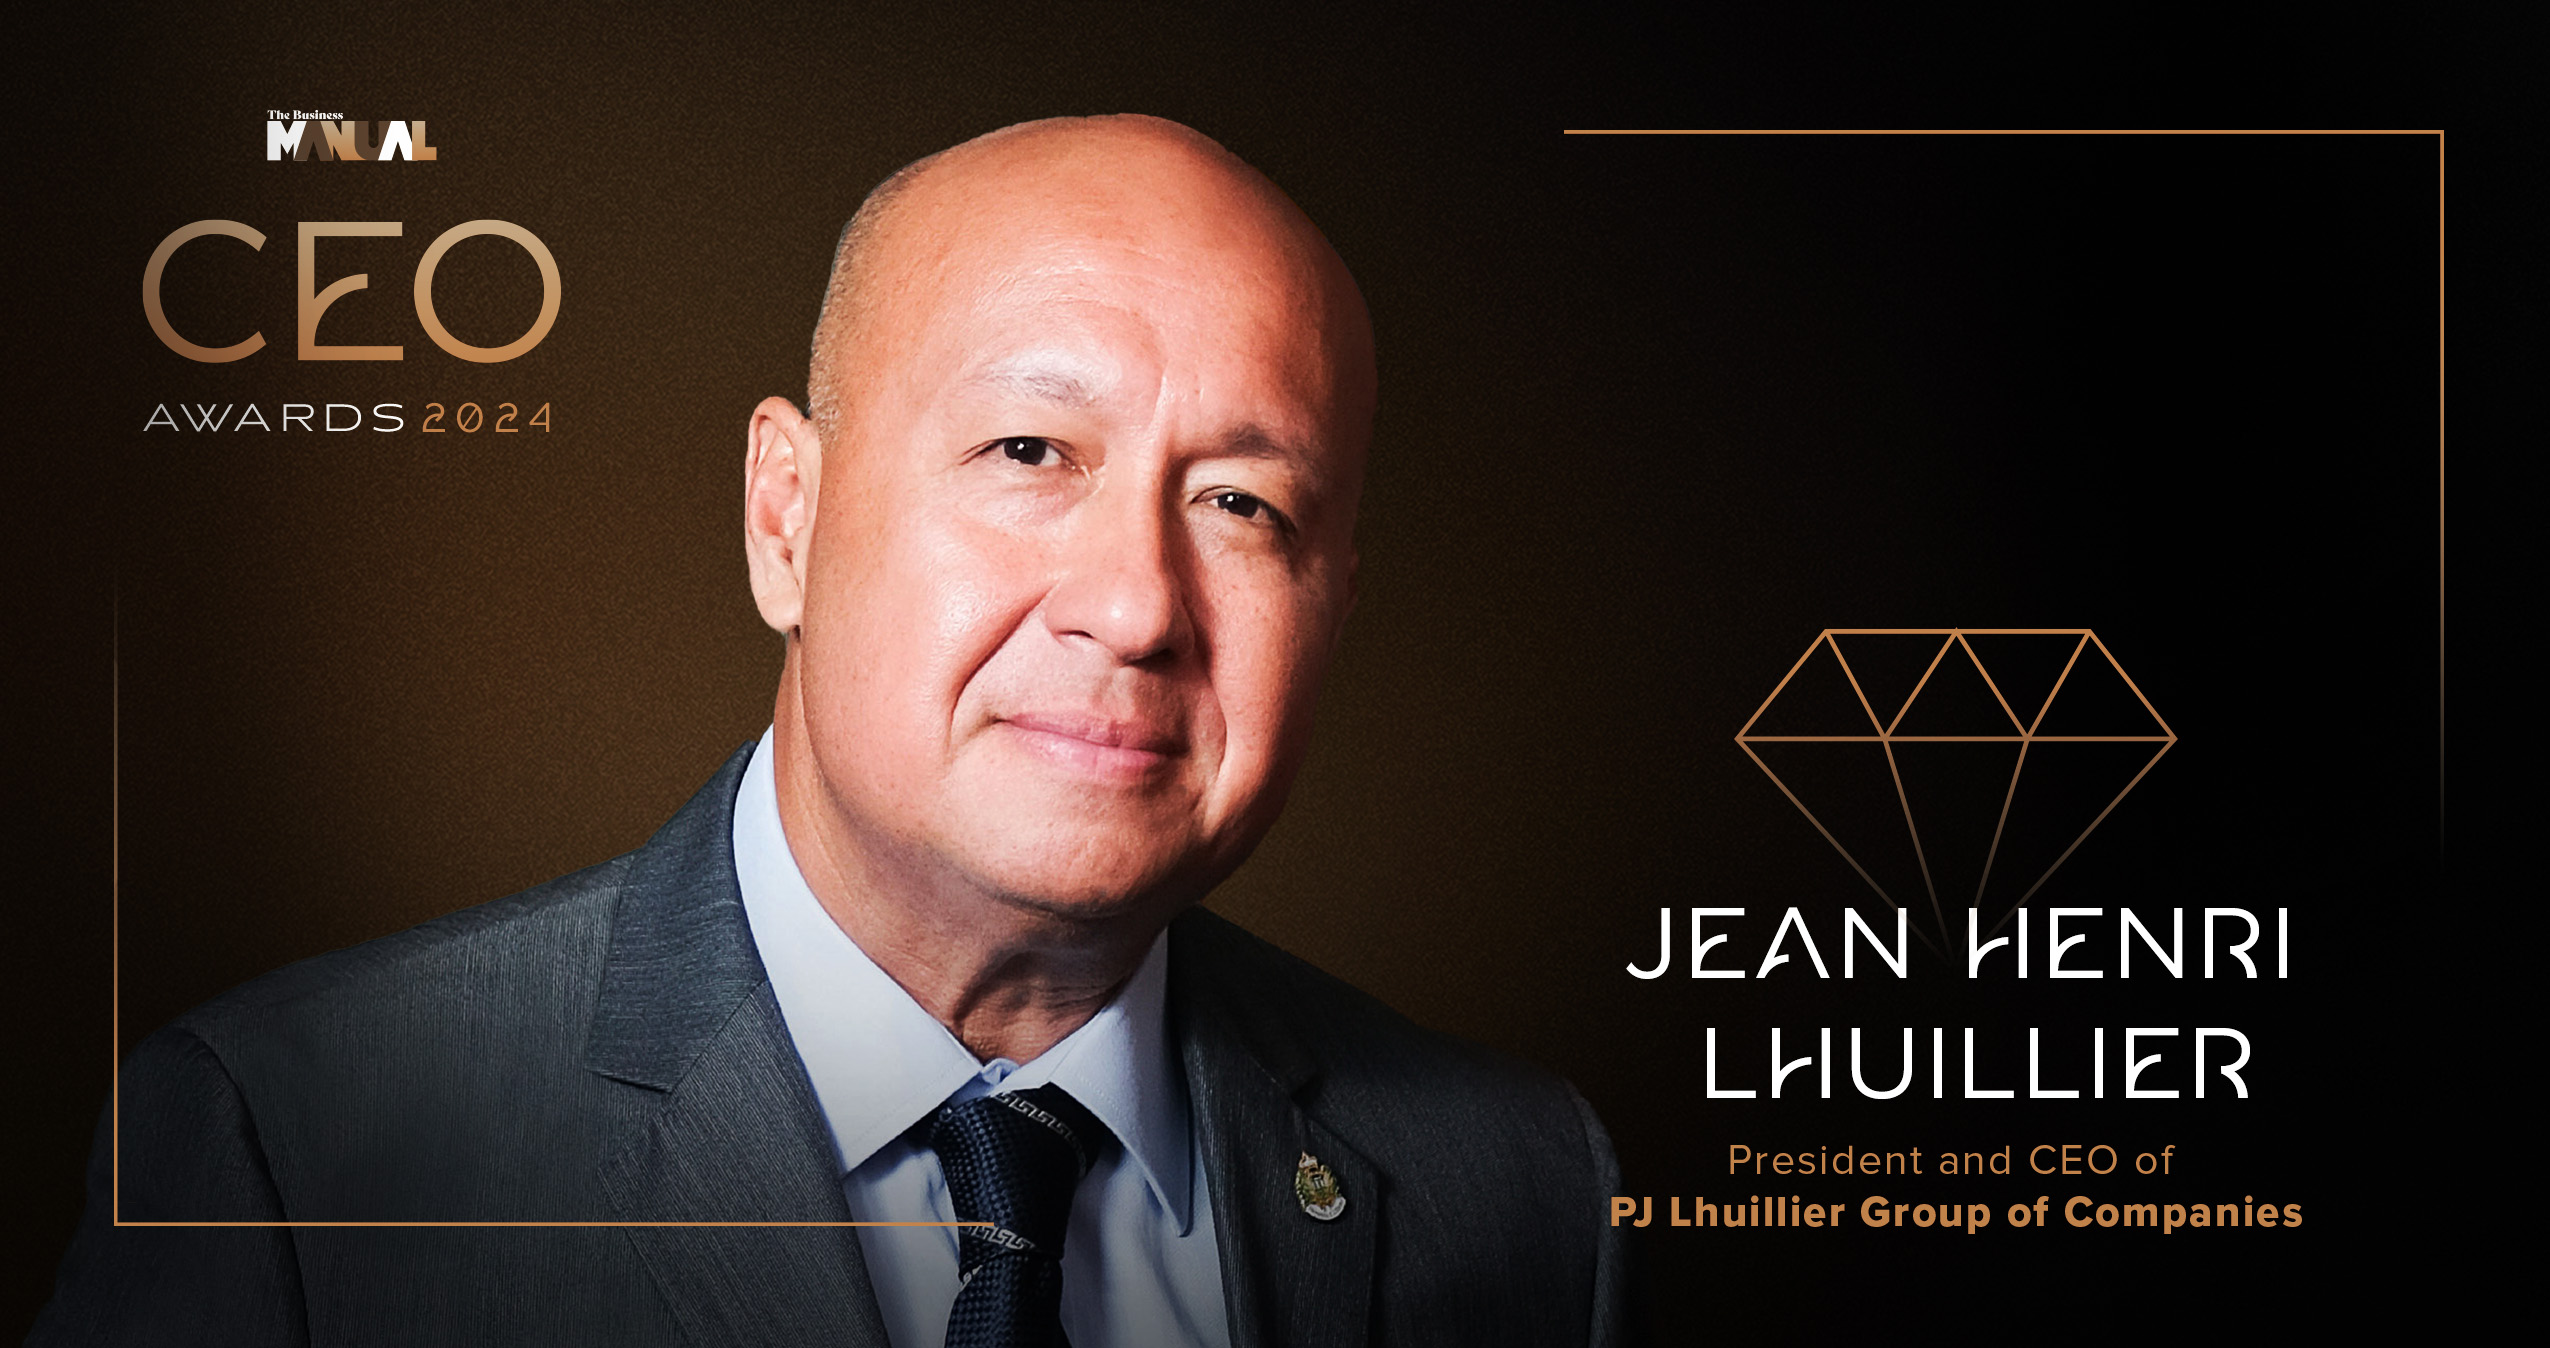 Elevating Philippine Microfinance: CEO Awards Honoree Jean Henri Lhuillier